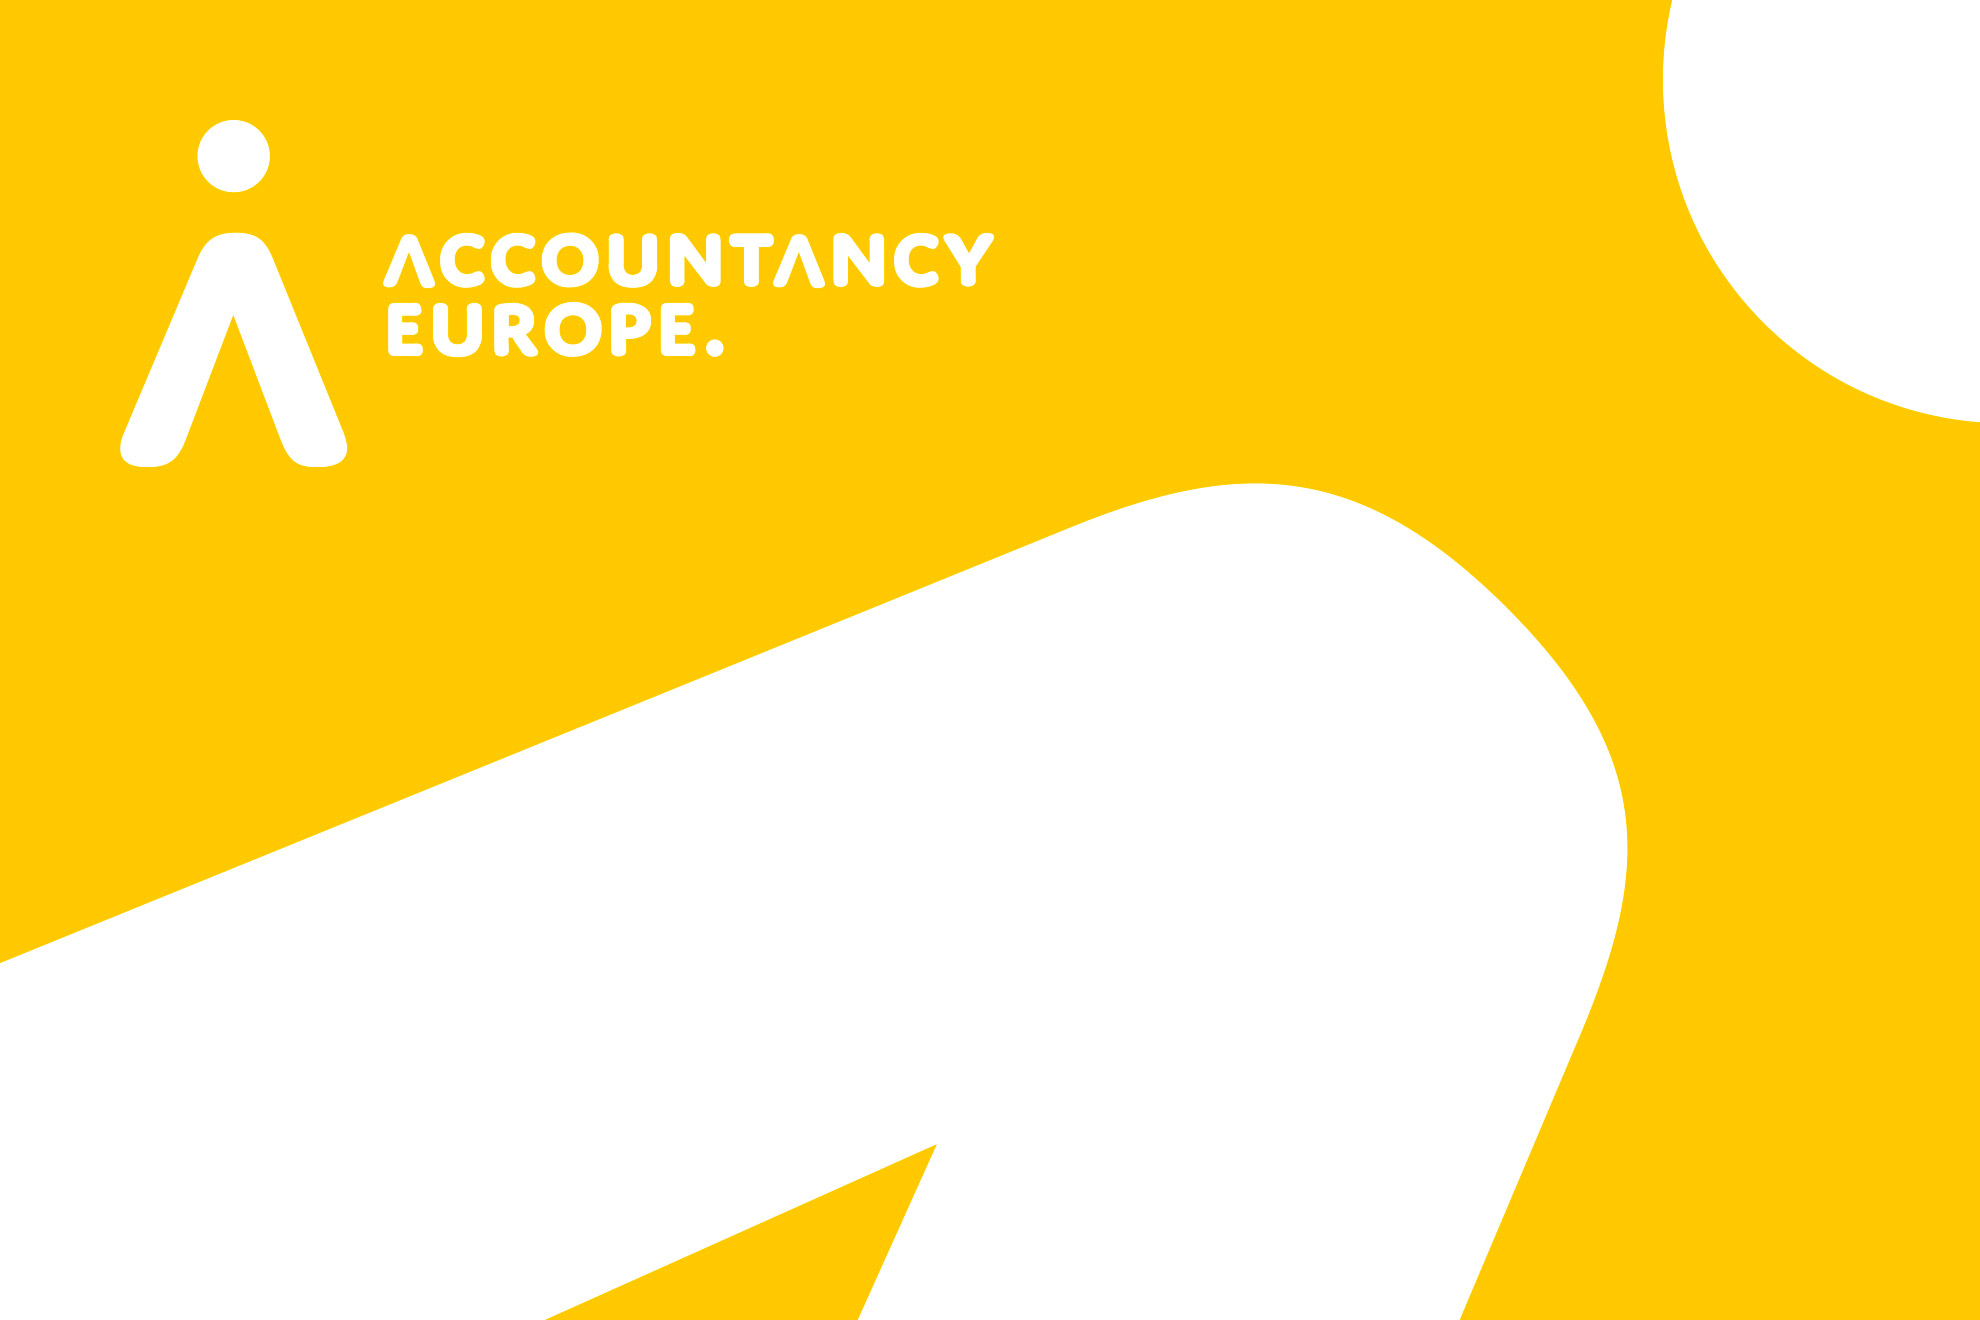 European accountants support move to accrual accounting in the public sector, recognising public interest